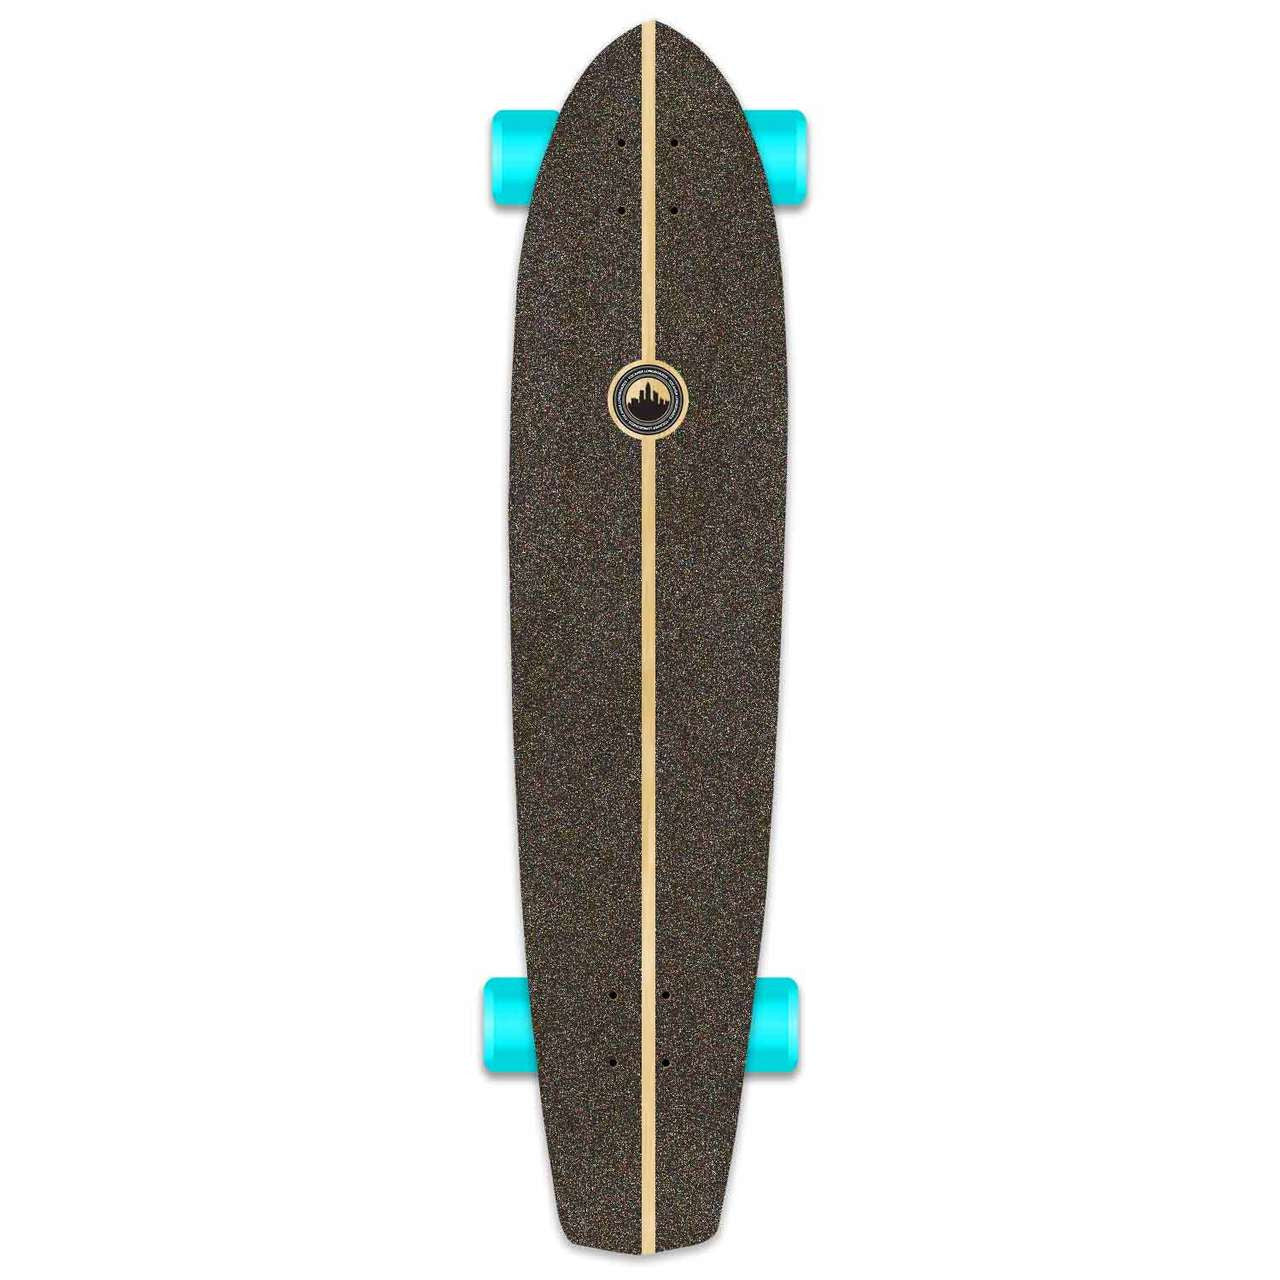 Yocaher Slimkick Longboard Complete - The Bird Natural